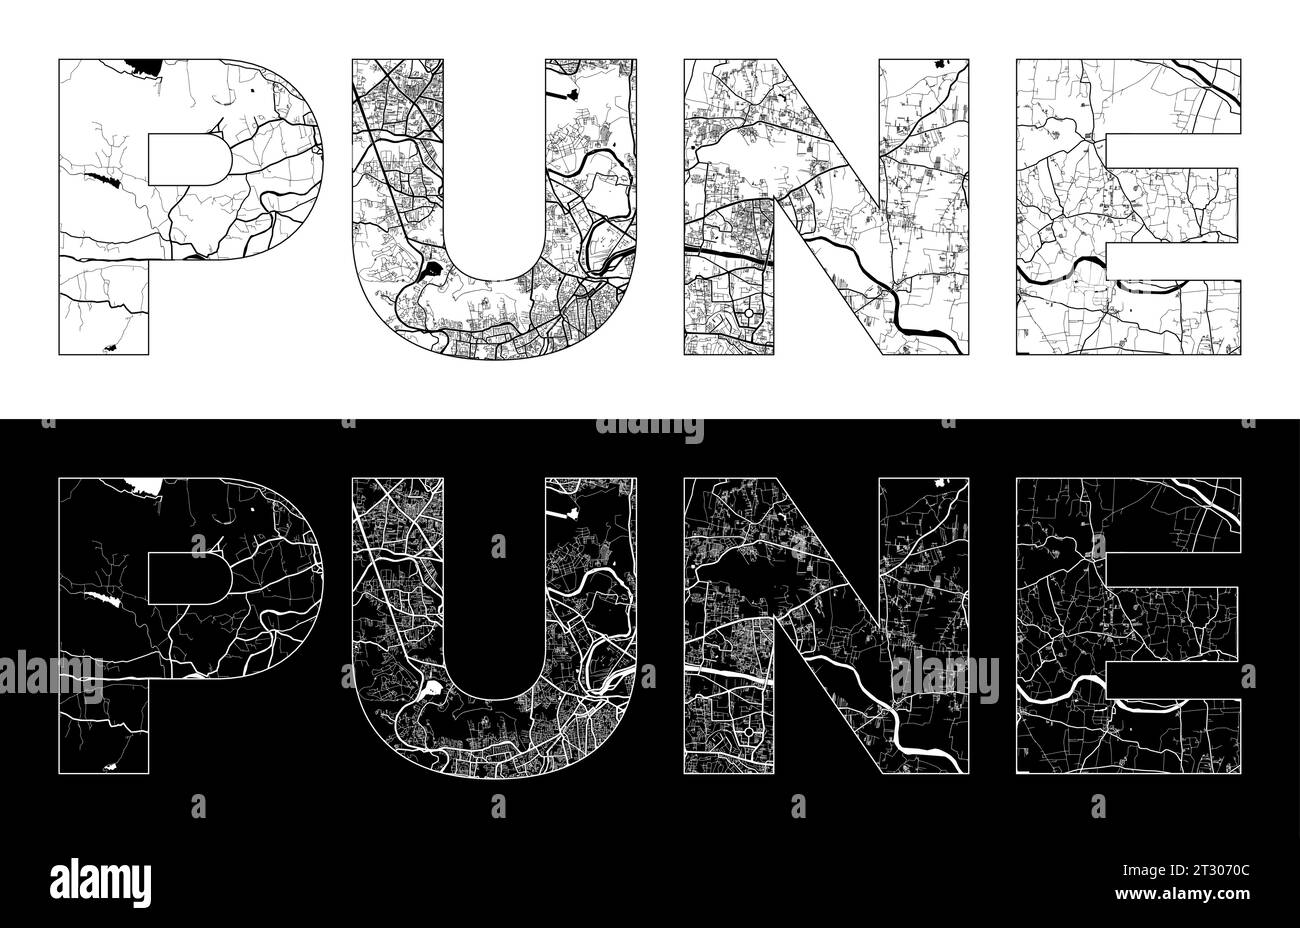 Pune City Name (India, Asia) with black white city map illustration vector Stock Vector